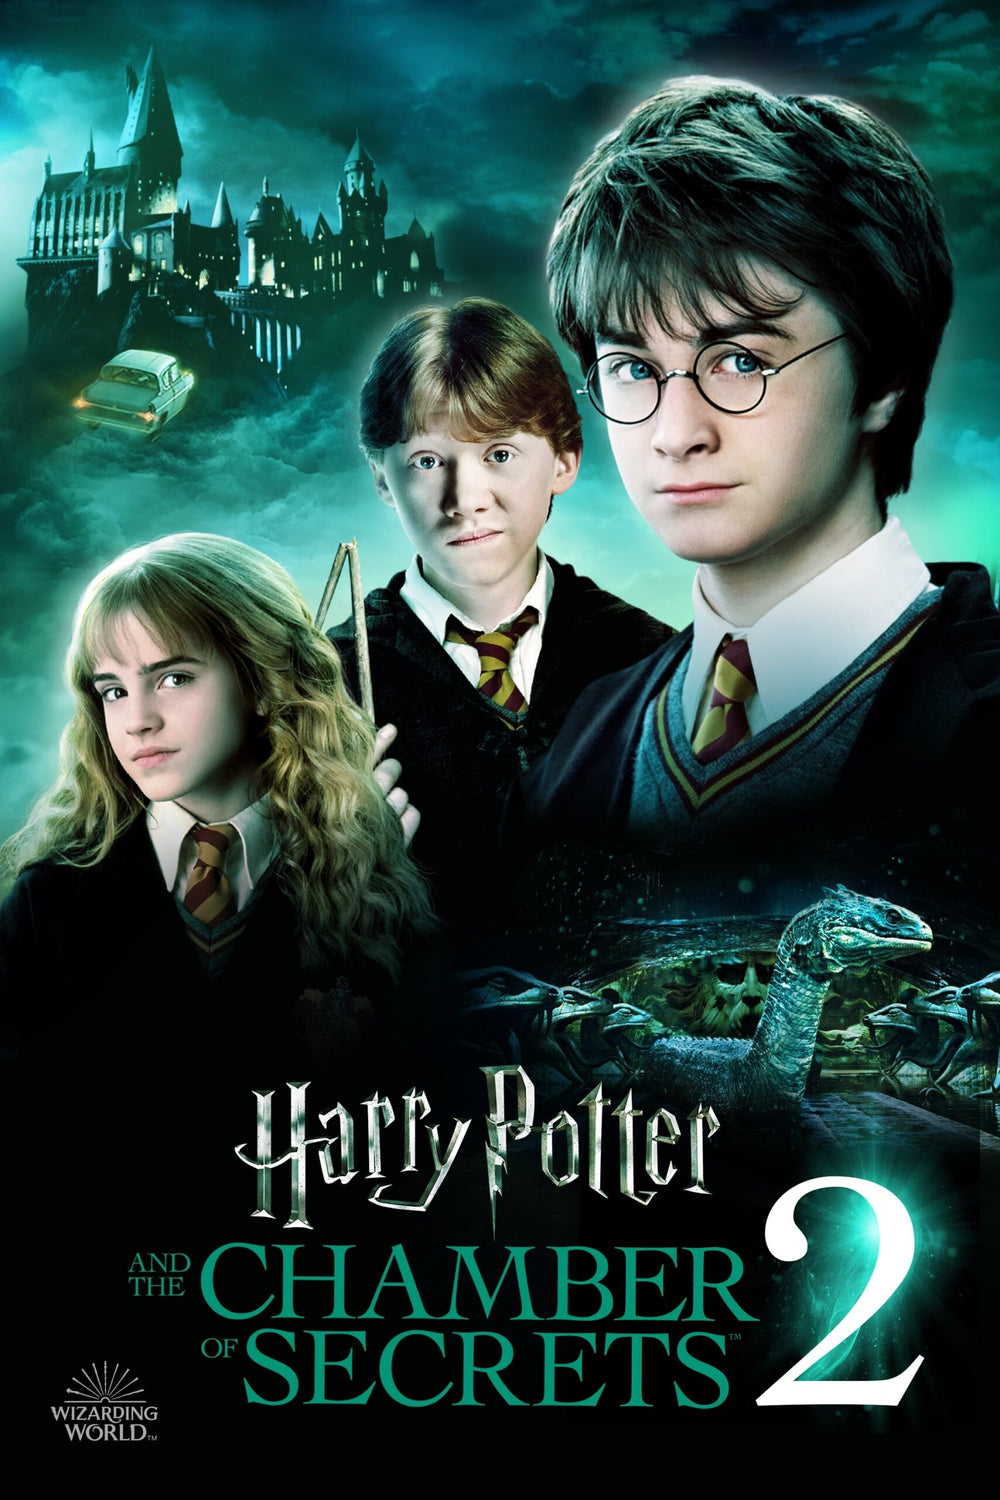 HARRY POTTER AND THE CHAMBER OF SECRETS 4K Vudu/iTunes Via Moviesanywhere